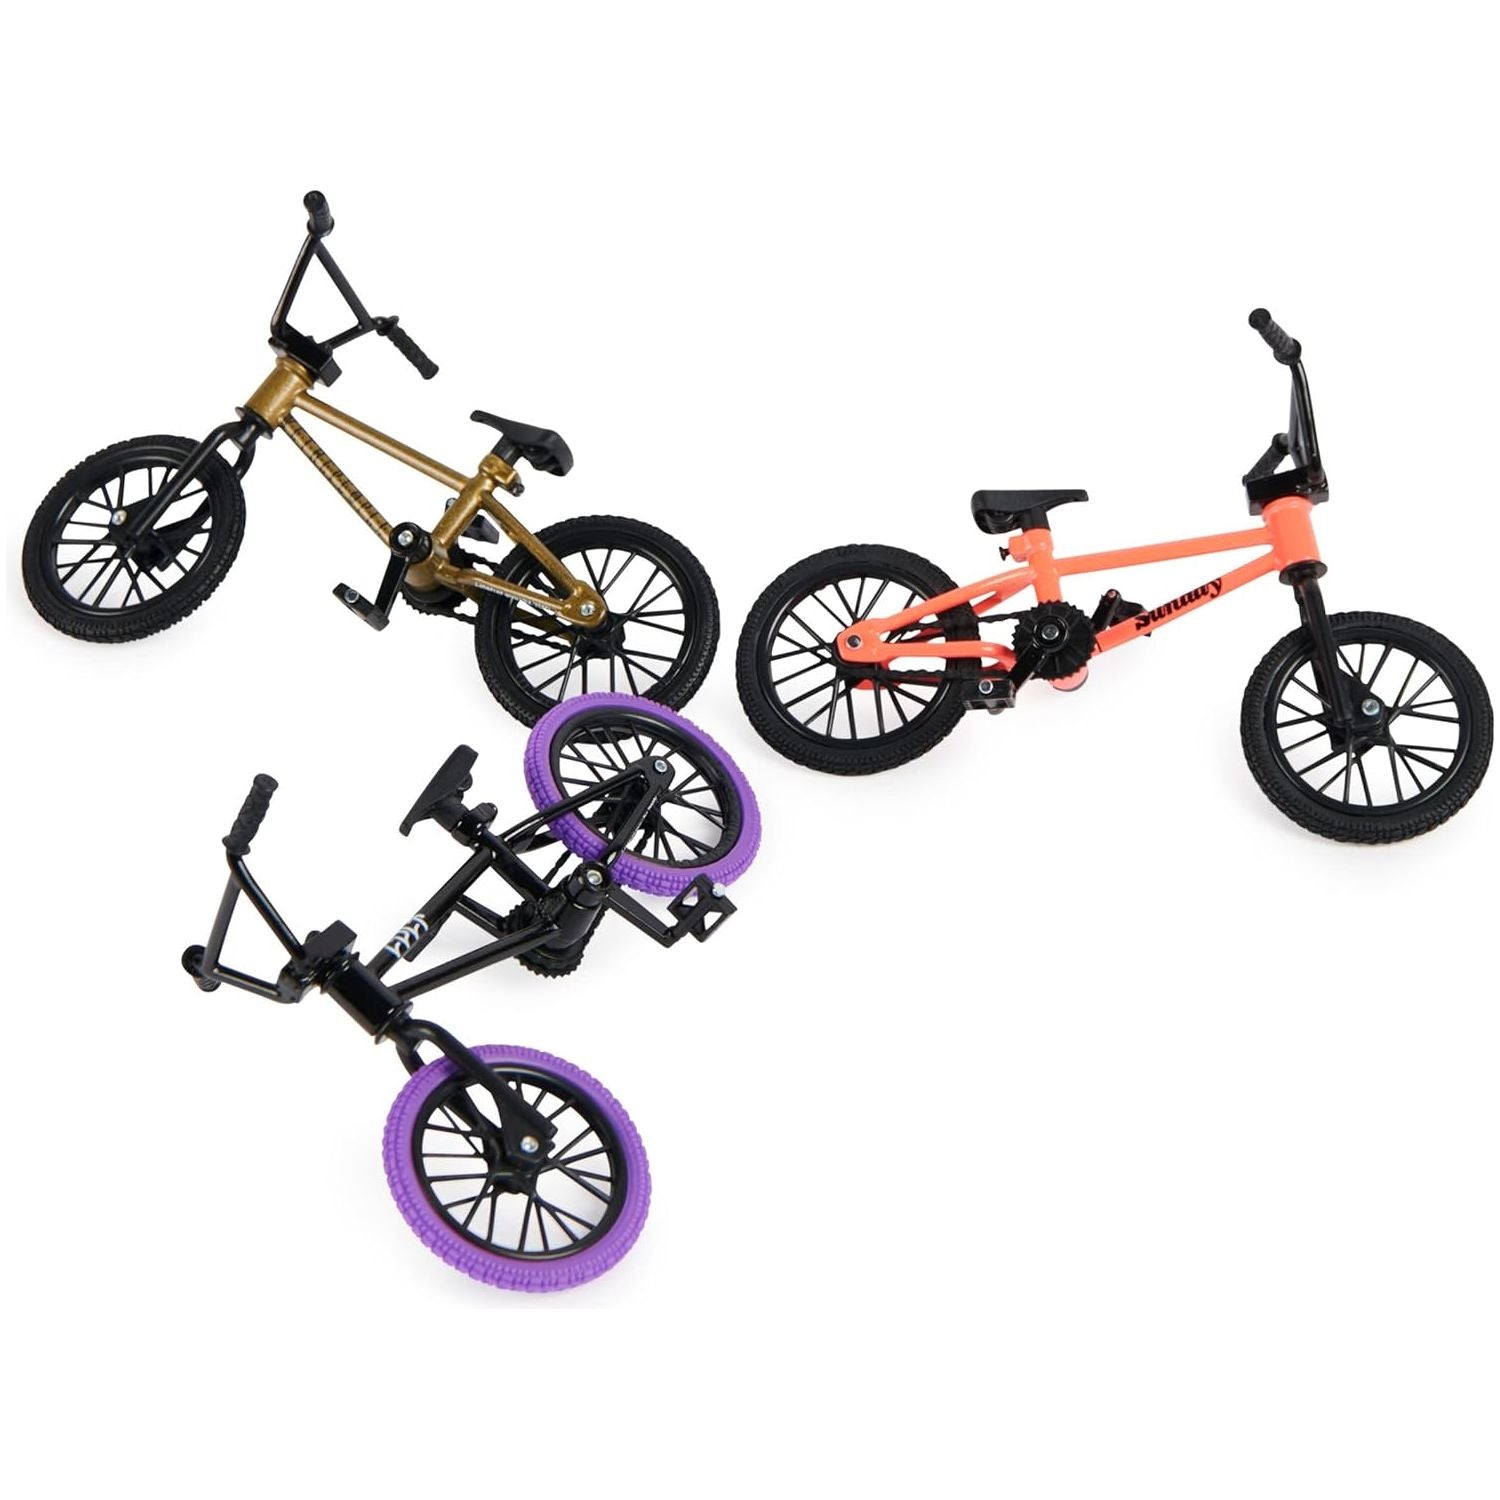 Tech Deck, BMX Finger Bike 3-Pack, Collectible and Customizable Mini BMX Bicycle Toys for Collectors